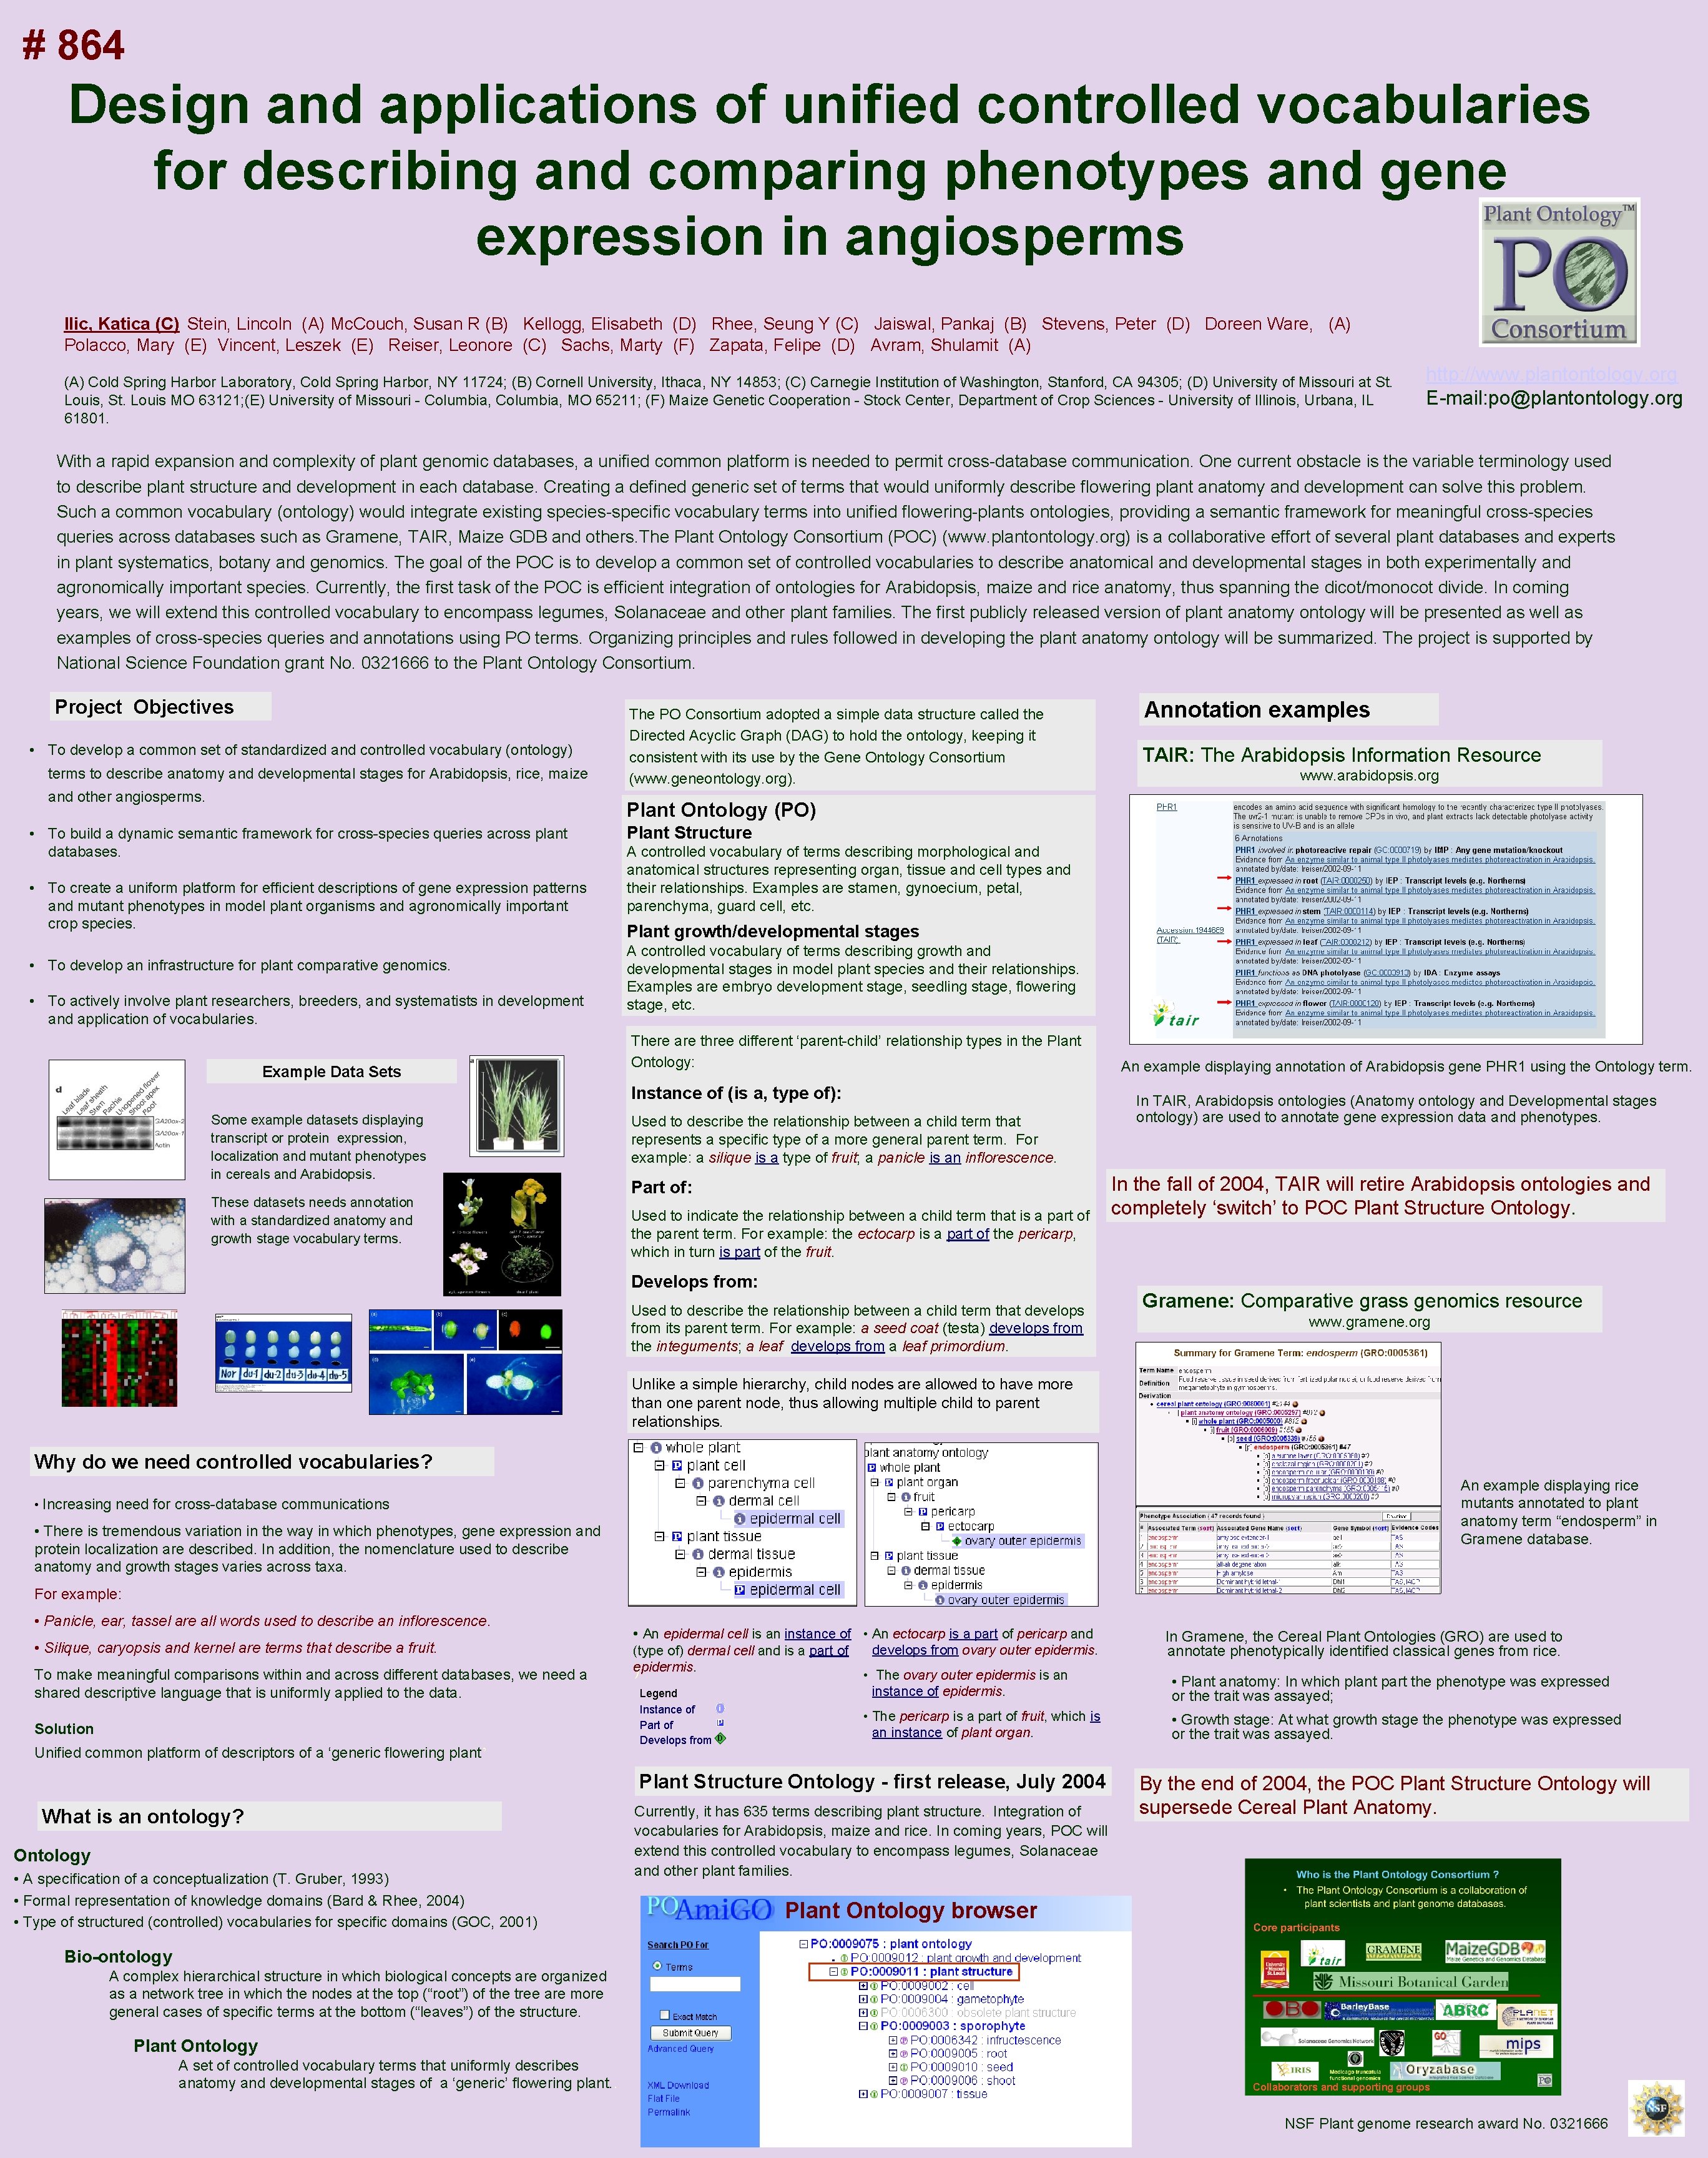 # 864 Design and applications of unified controlled vocabularies for describing and comparing phenotypes